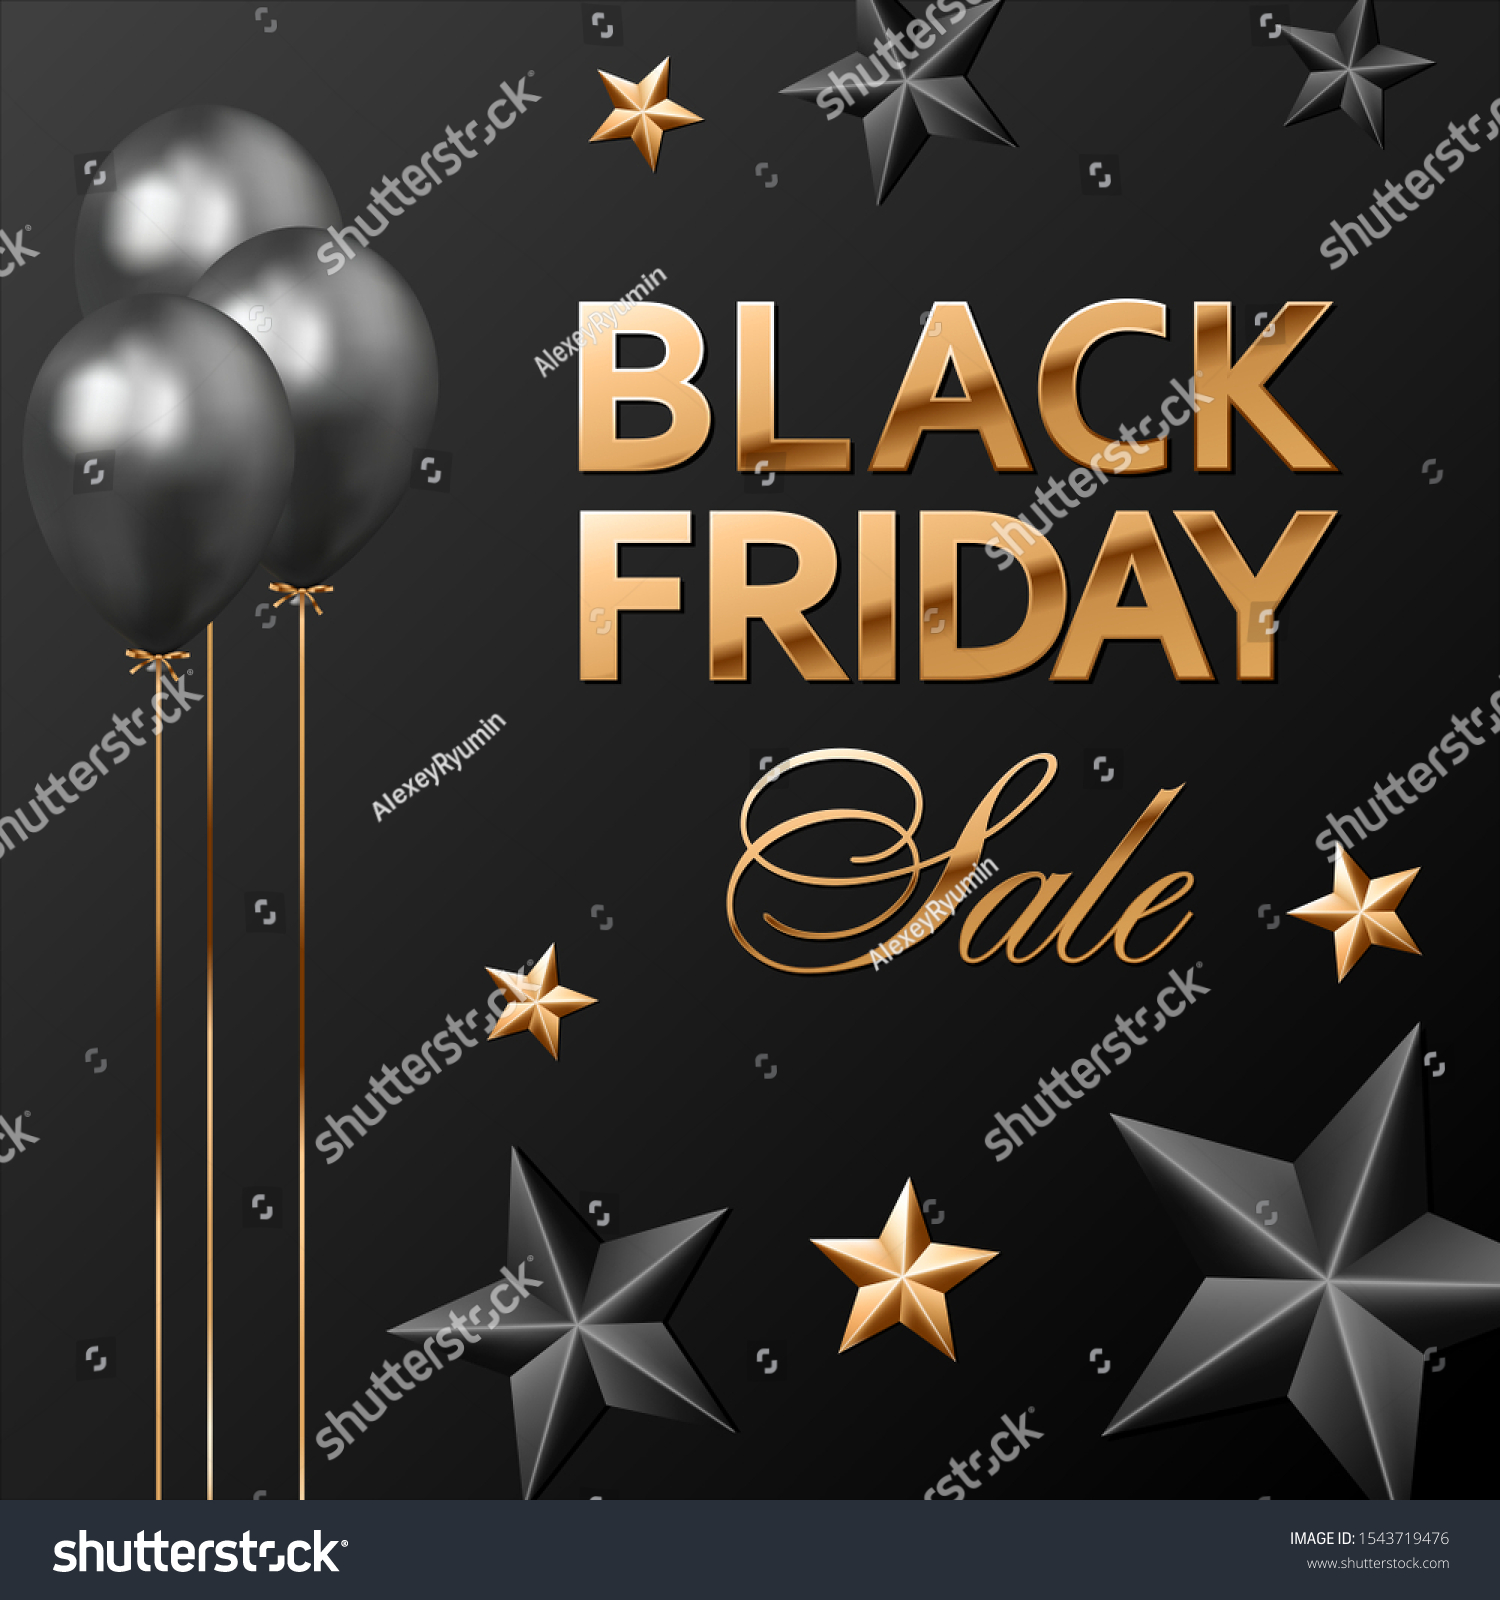 Black Friday Sale golden lettering on black background with black baloons and gold and black stars. Square vector template for banner or social network post.
